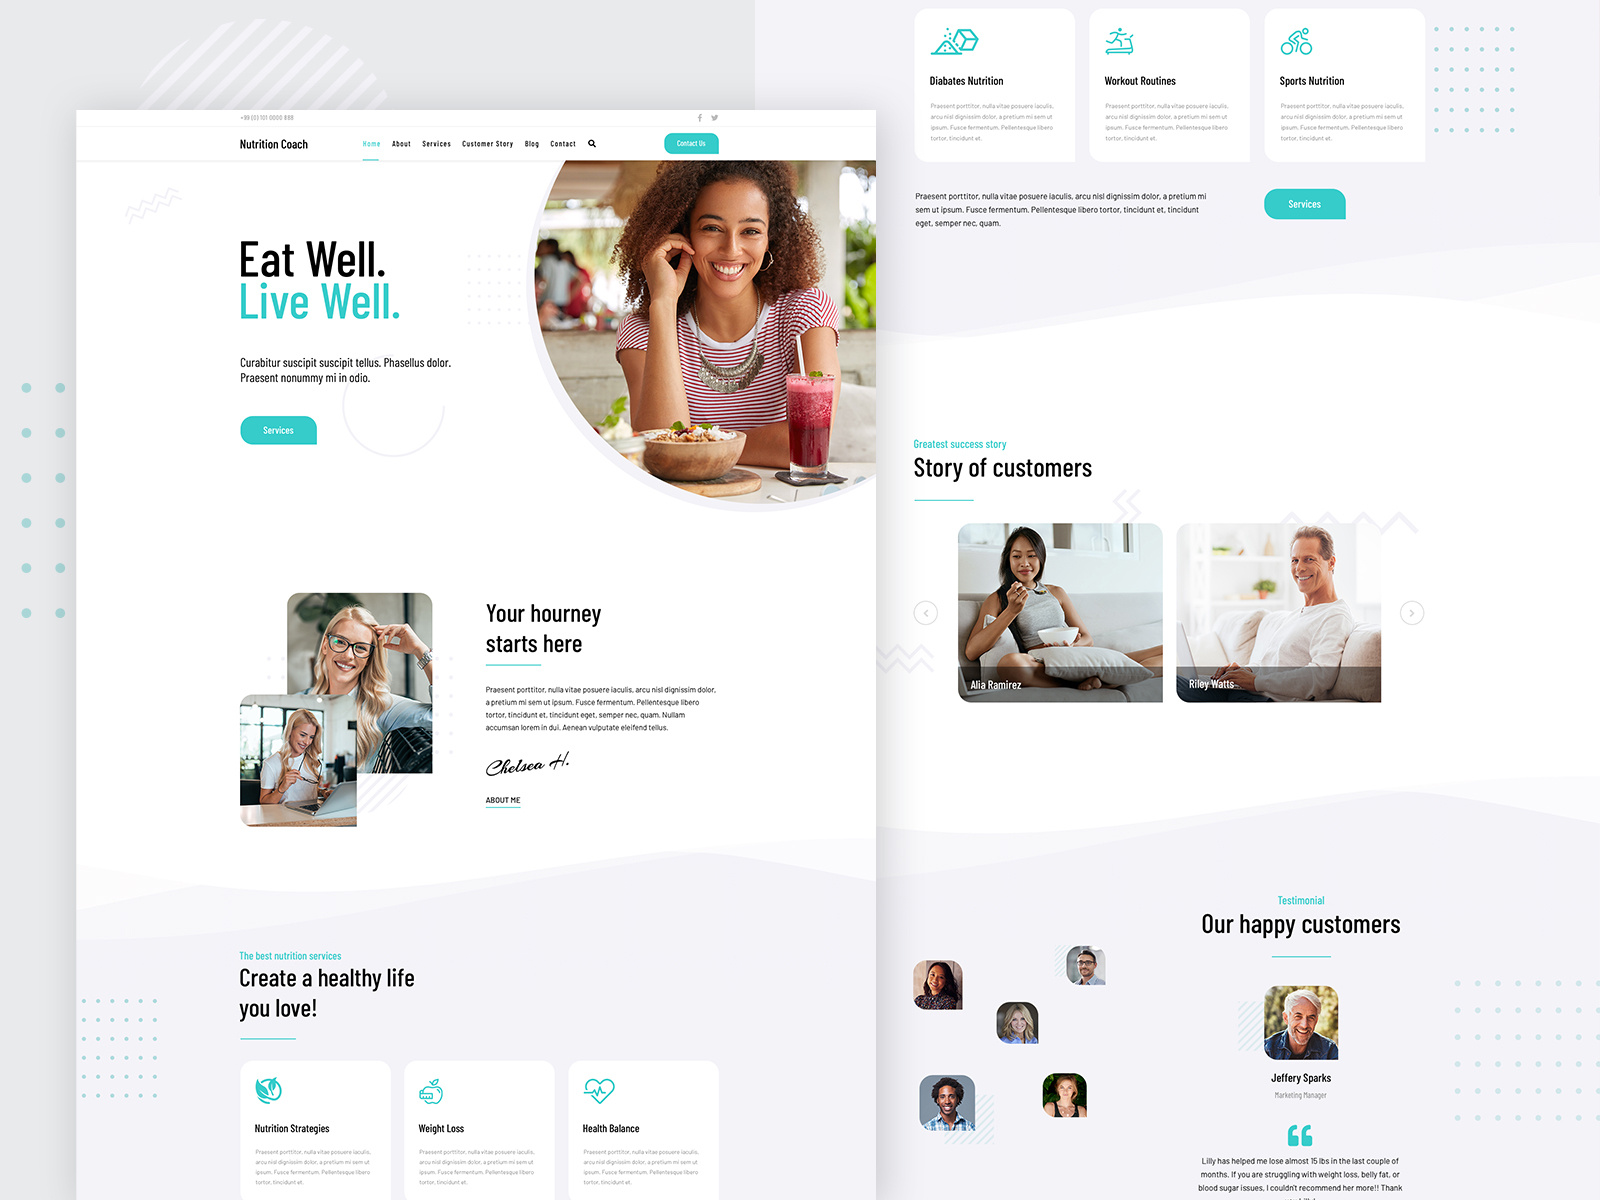 Nutrition Coach Template Design by Cuneyt Erkol on Dribbble